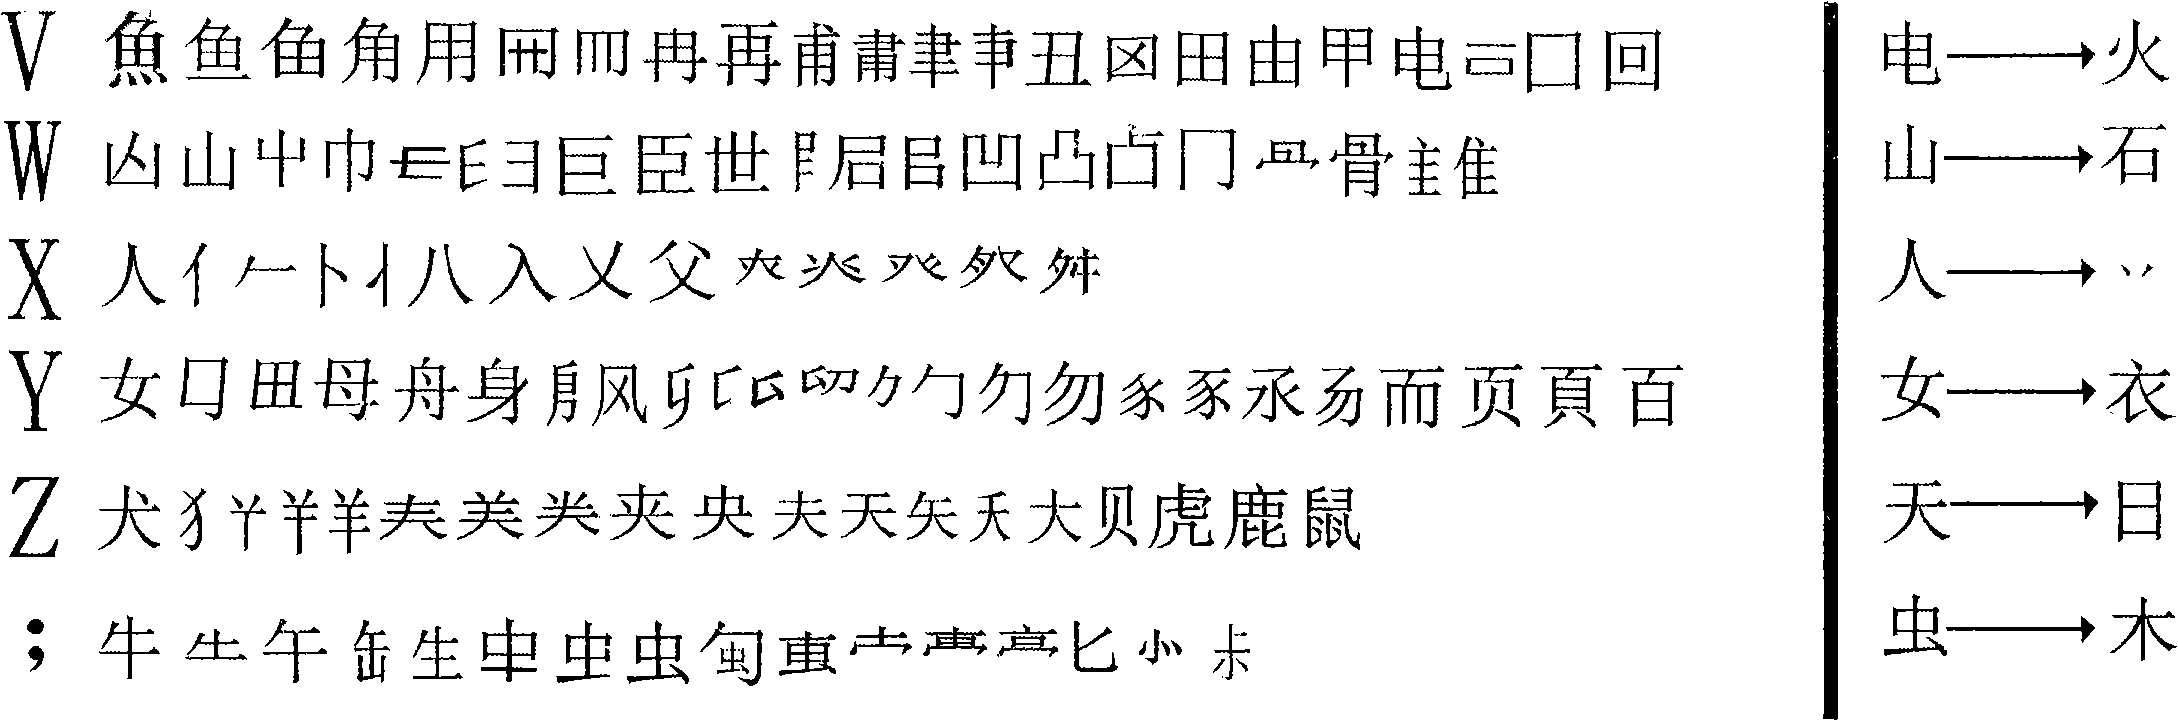 Simplified and traditional Chinese input method with no need of remembering codes